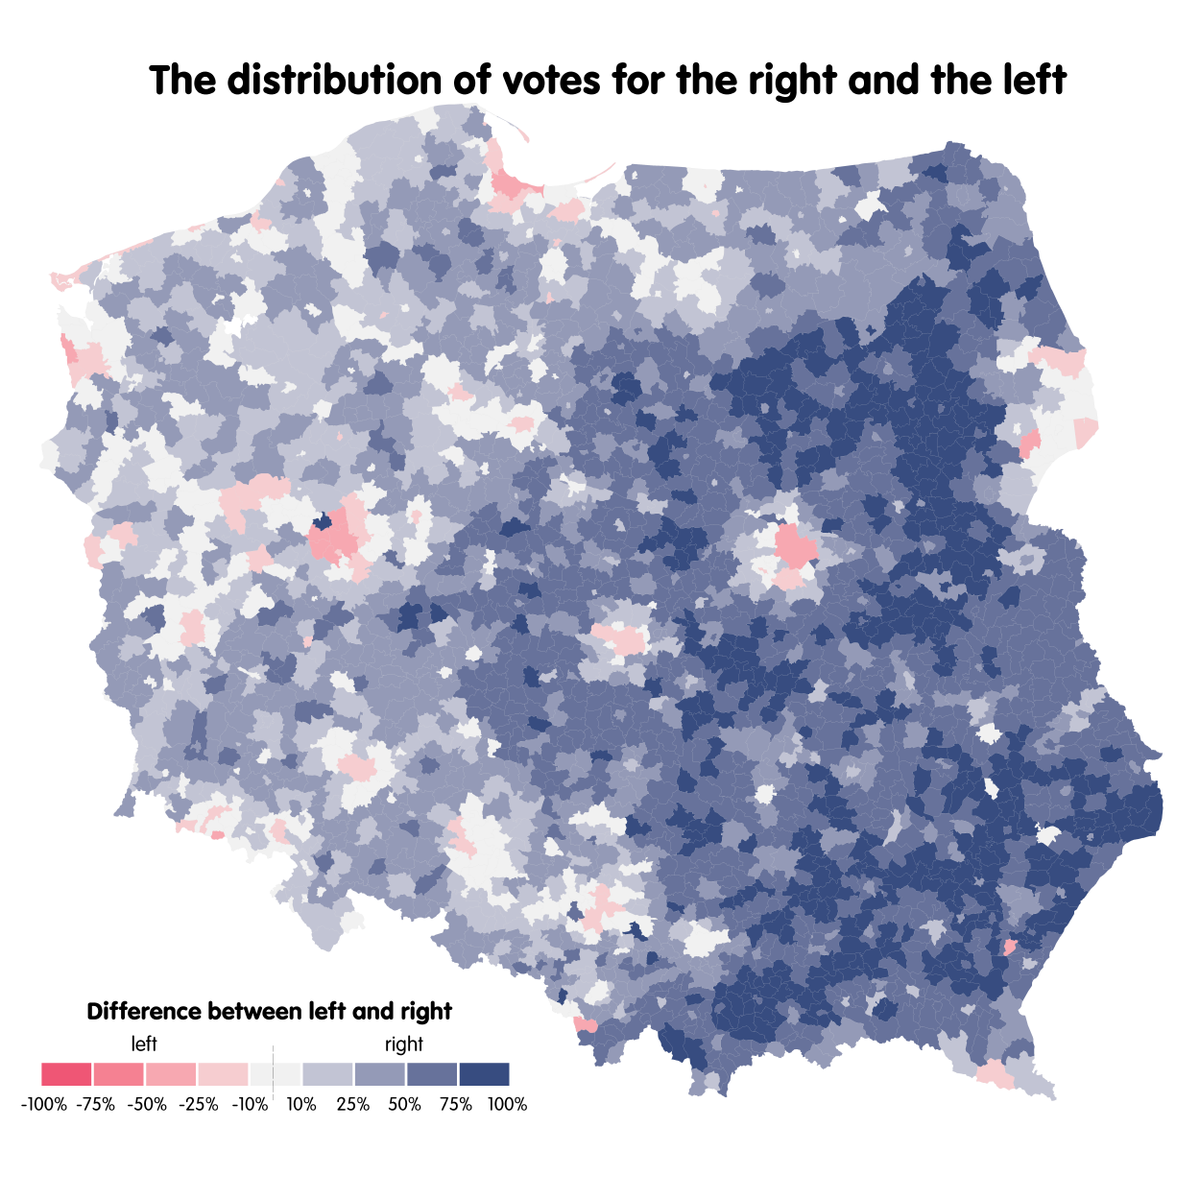 Poland - The distribution of votes for the right and the left